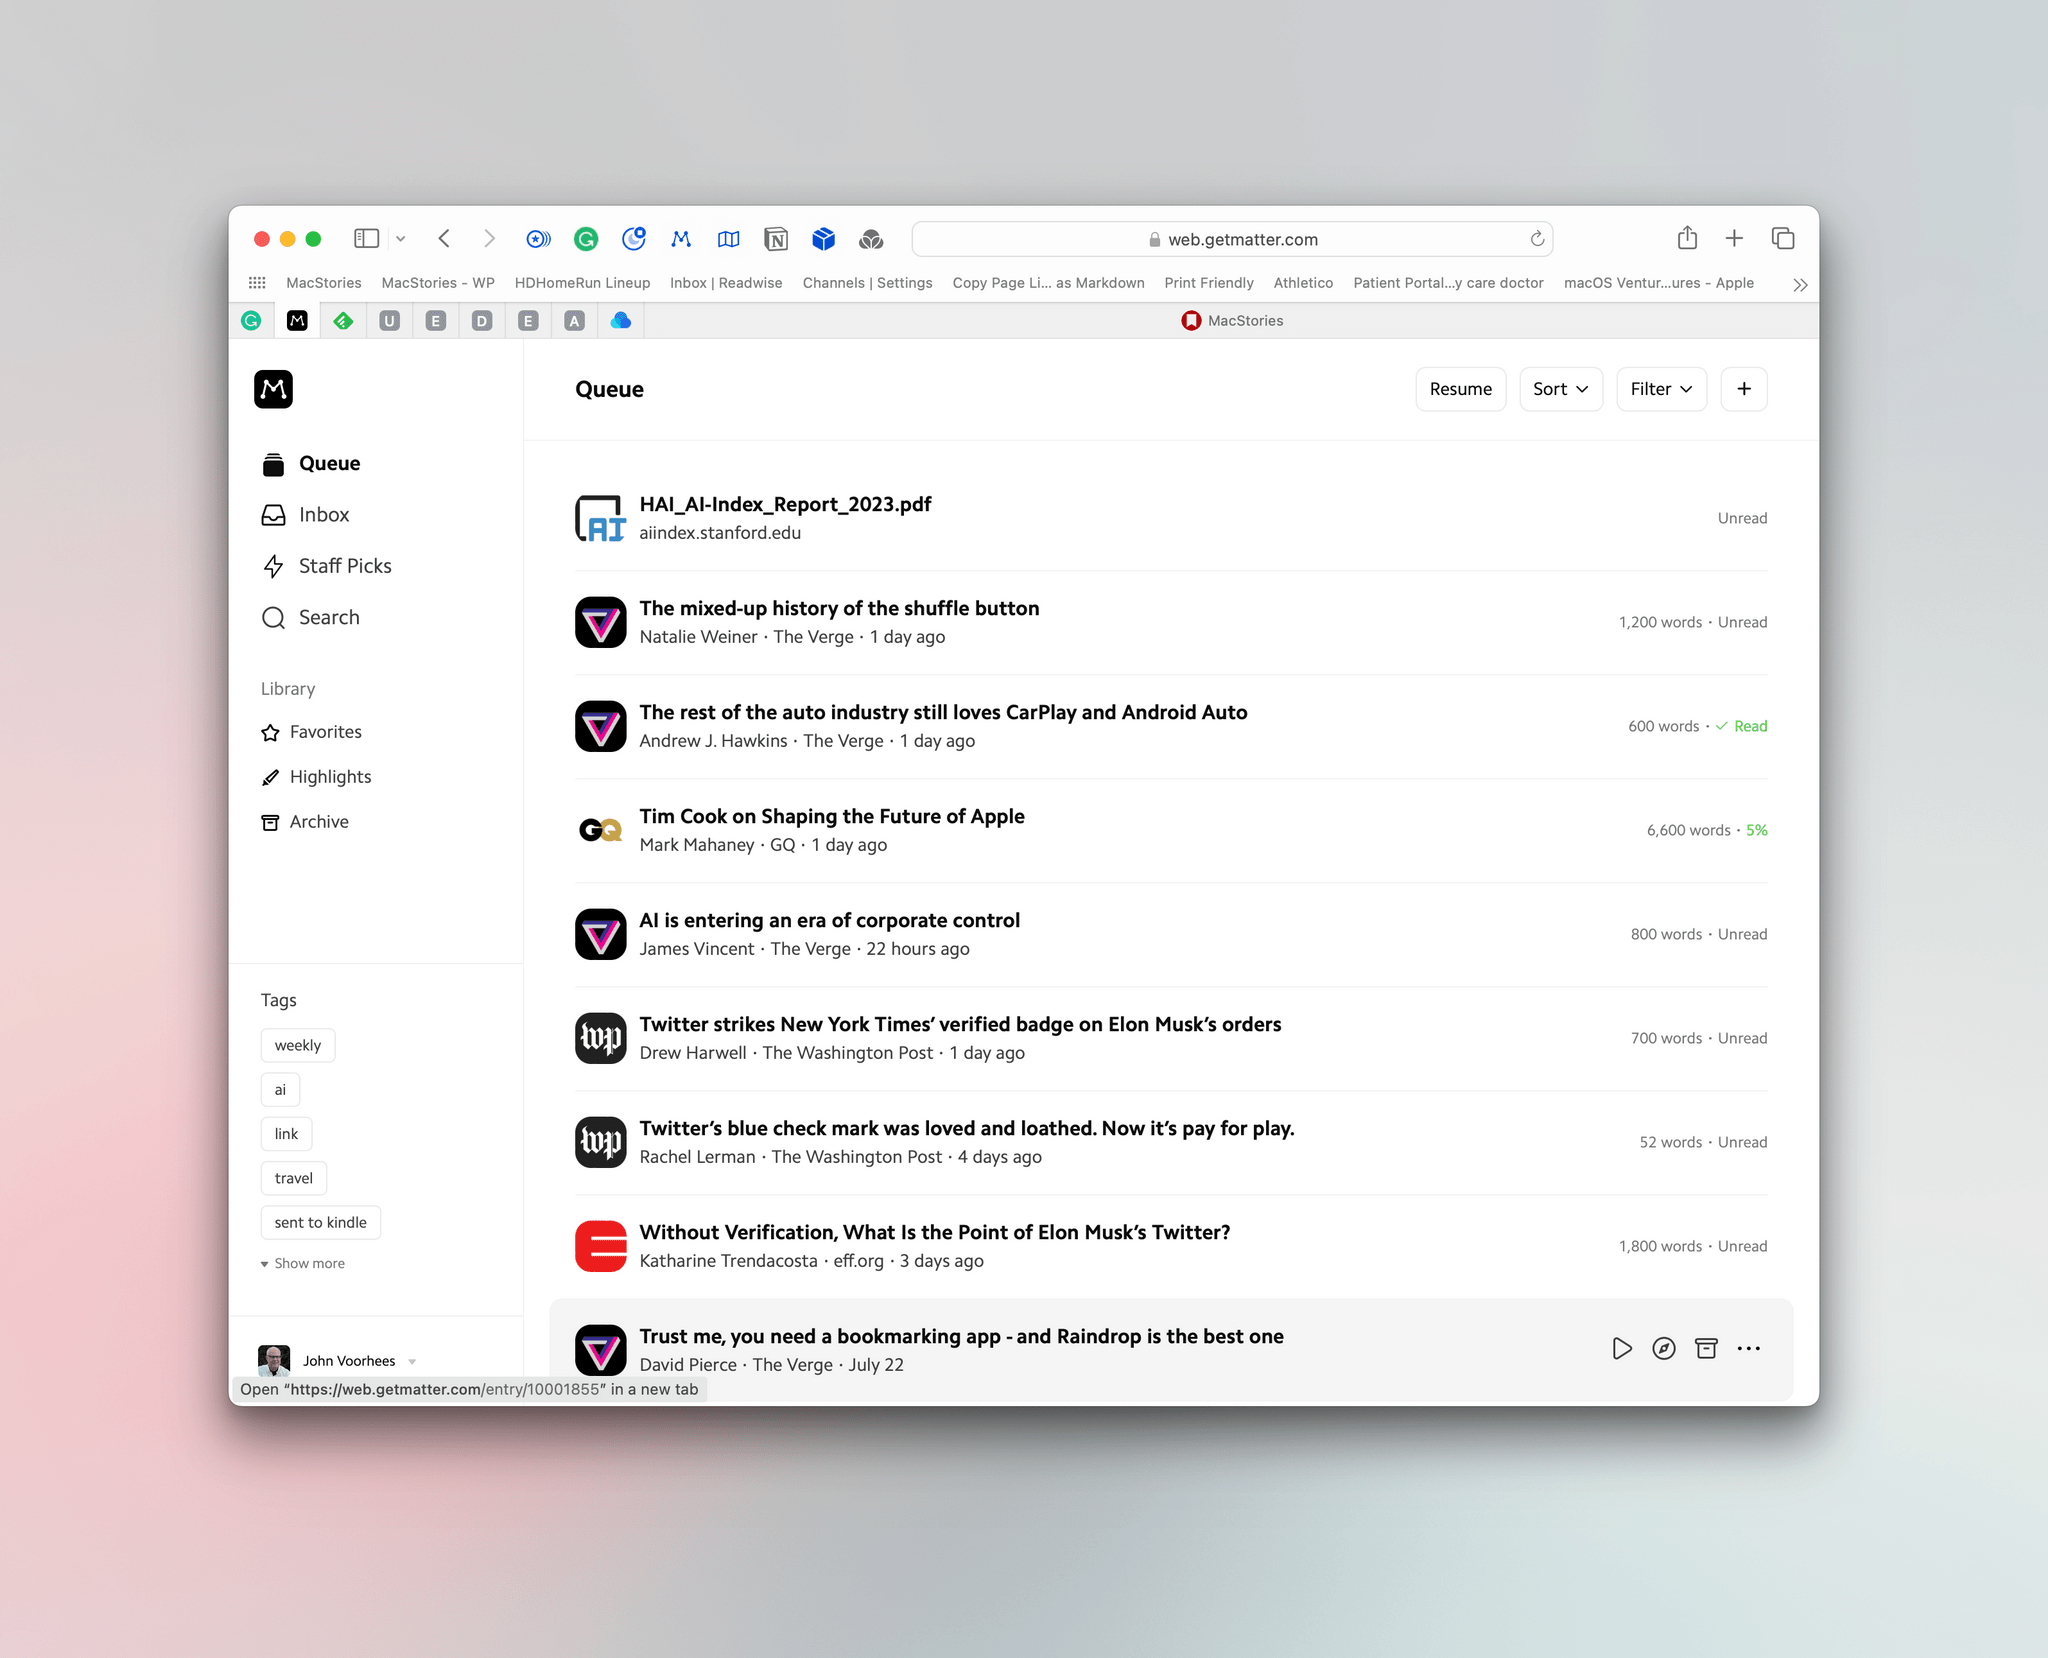 I primarily use Matter in a pinned Safari tab on my Mac.